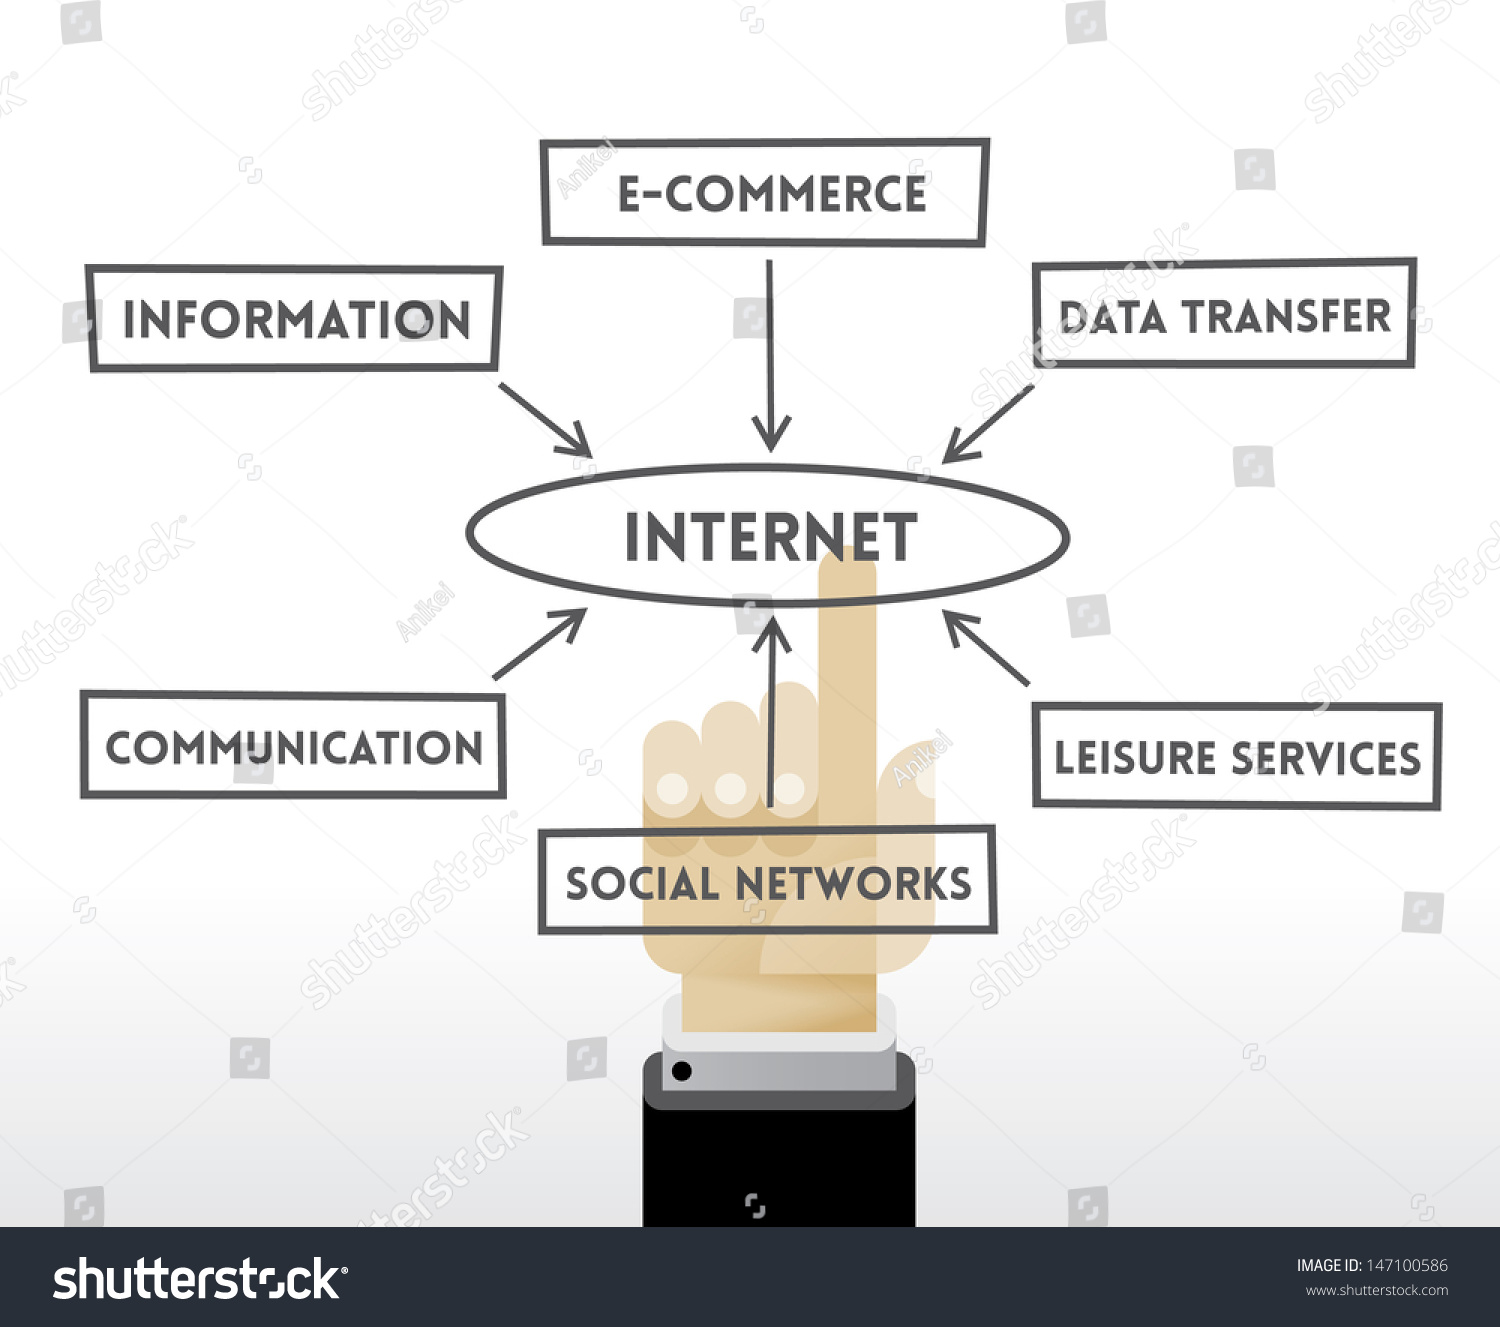 Chart On Internet Services